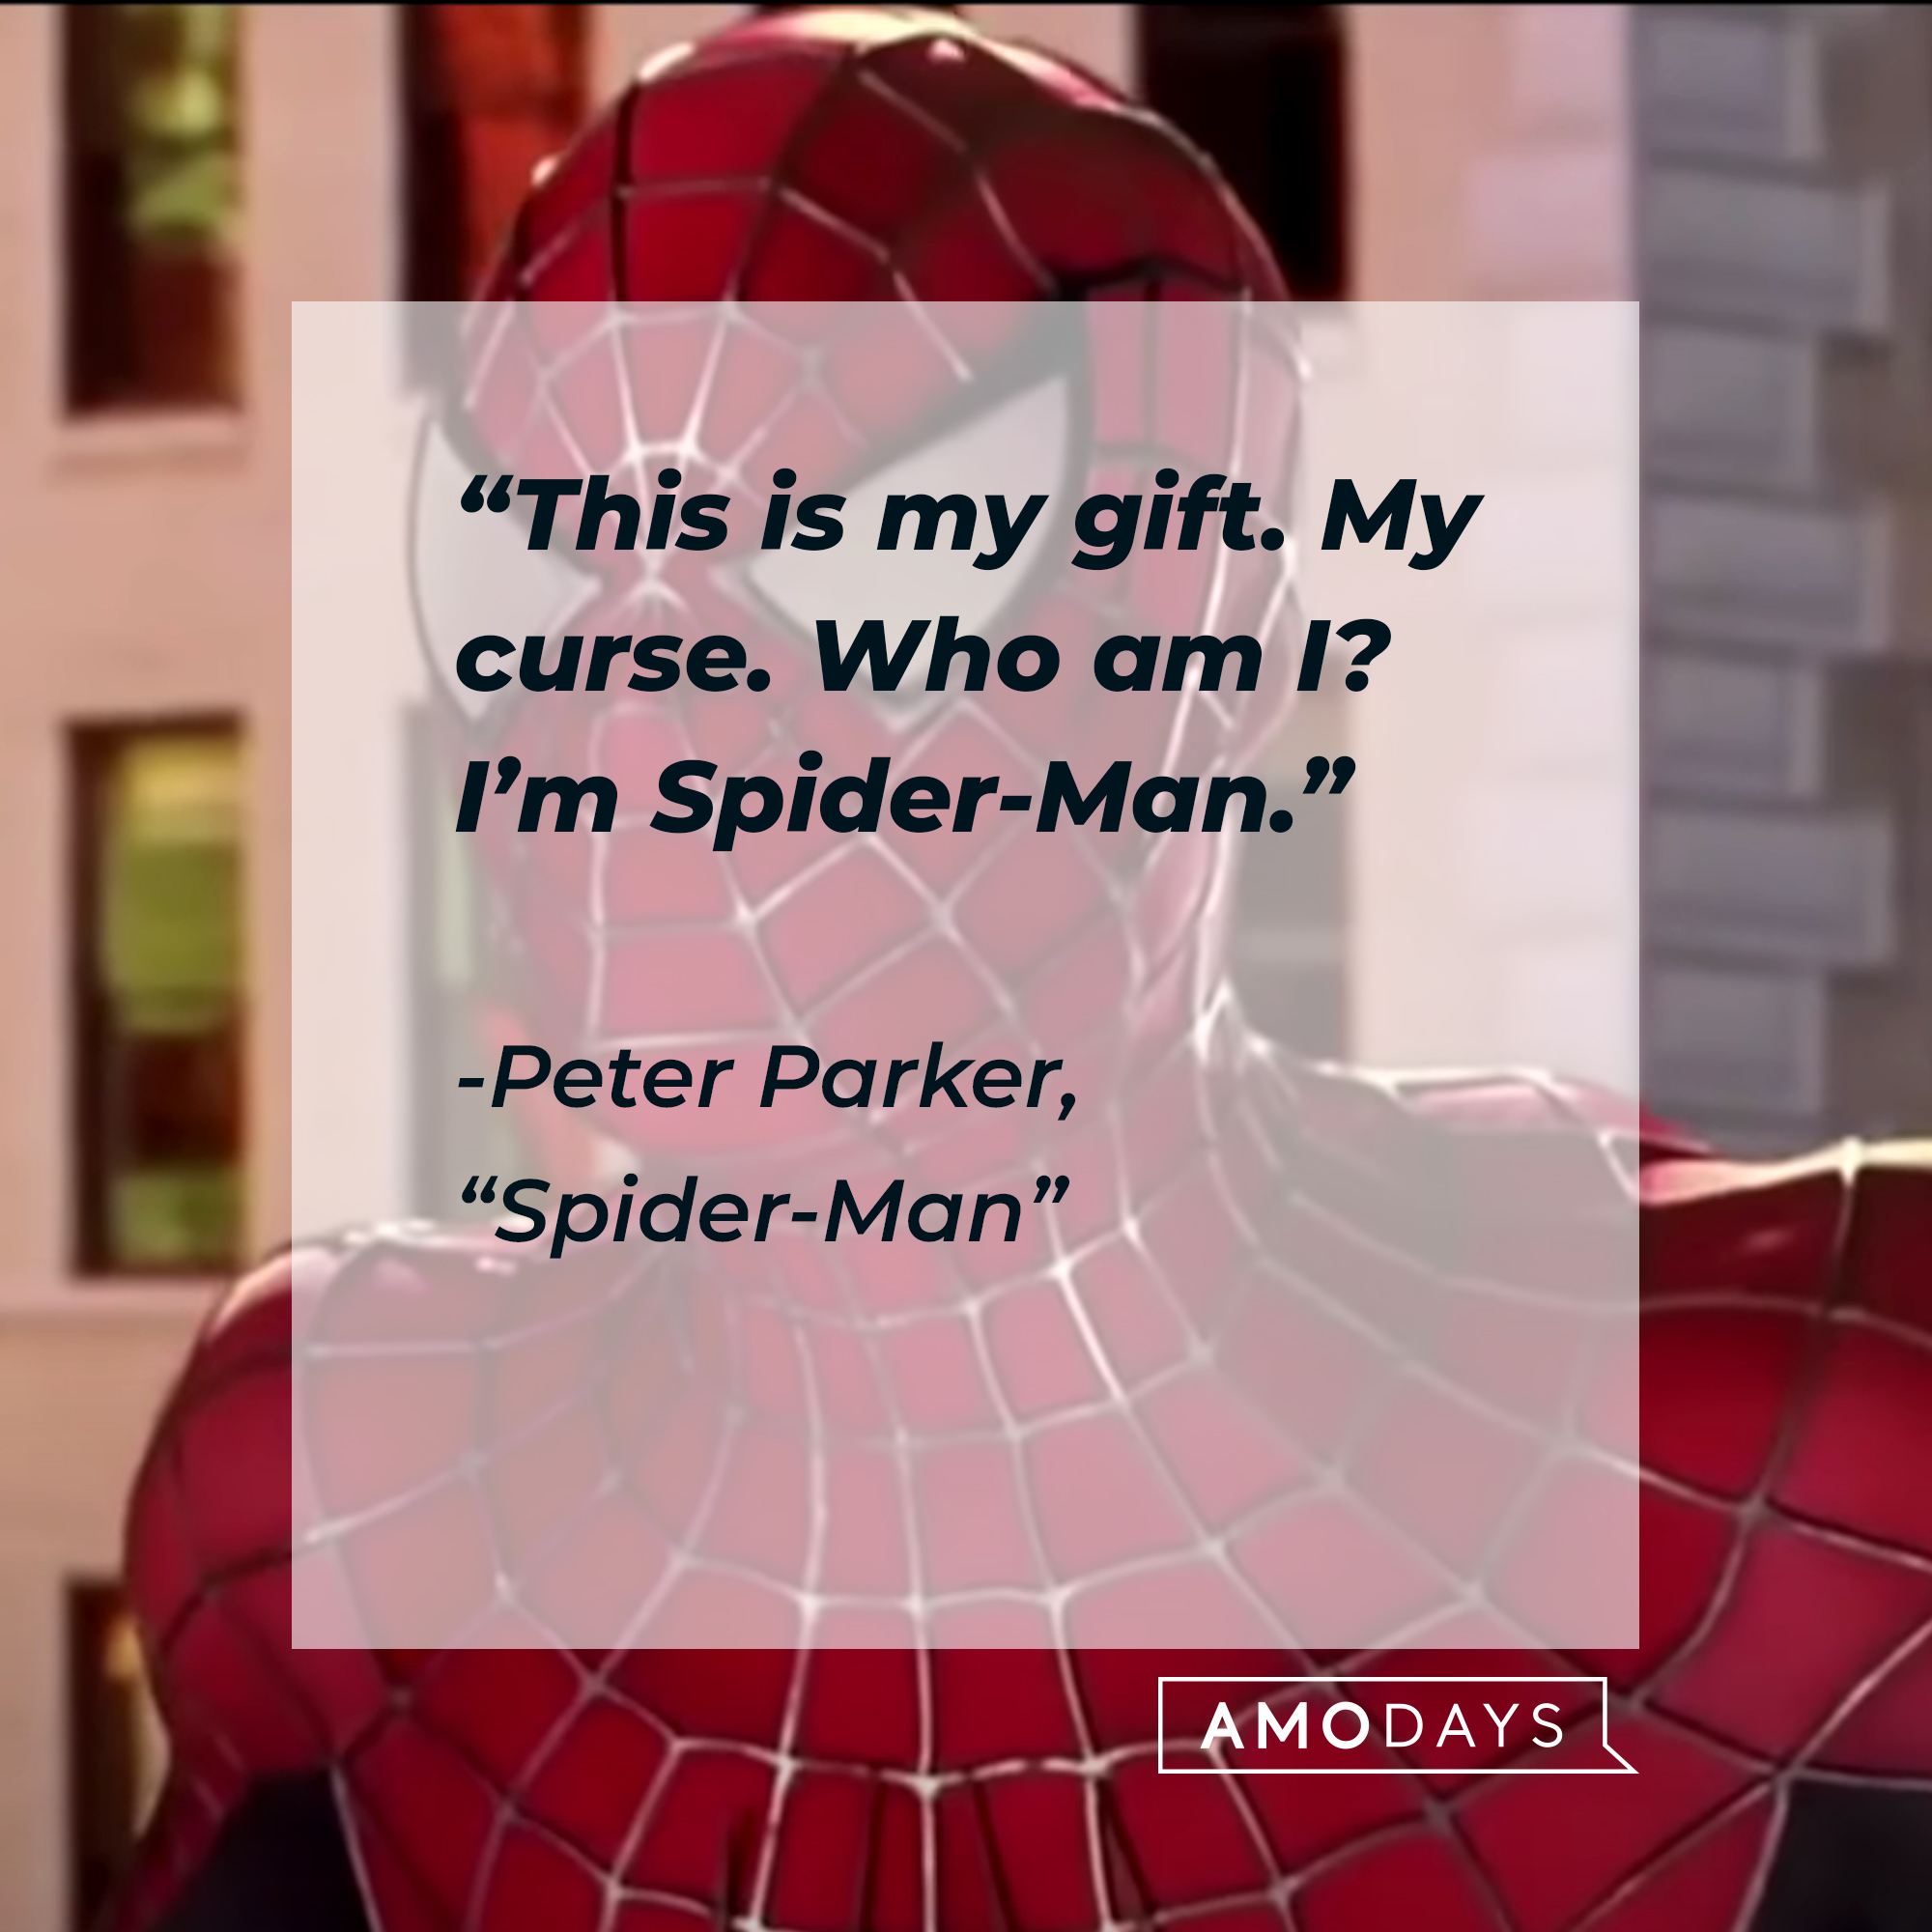 Spider-Man's quote from "Spider-Man:" “This is my gift. My curse. Who am I? I’m Spider-Man.” | Source: Facebook.com/SpiderManMovie